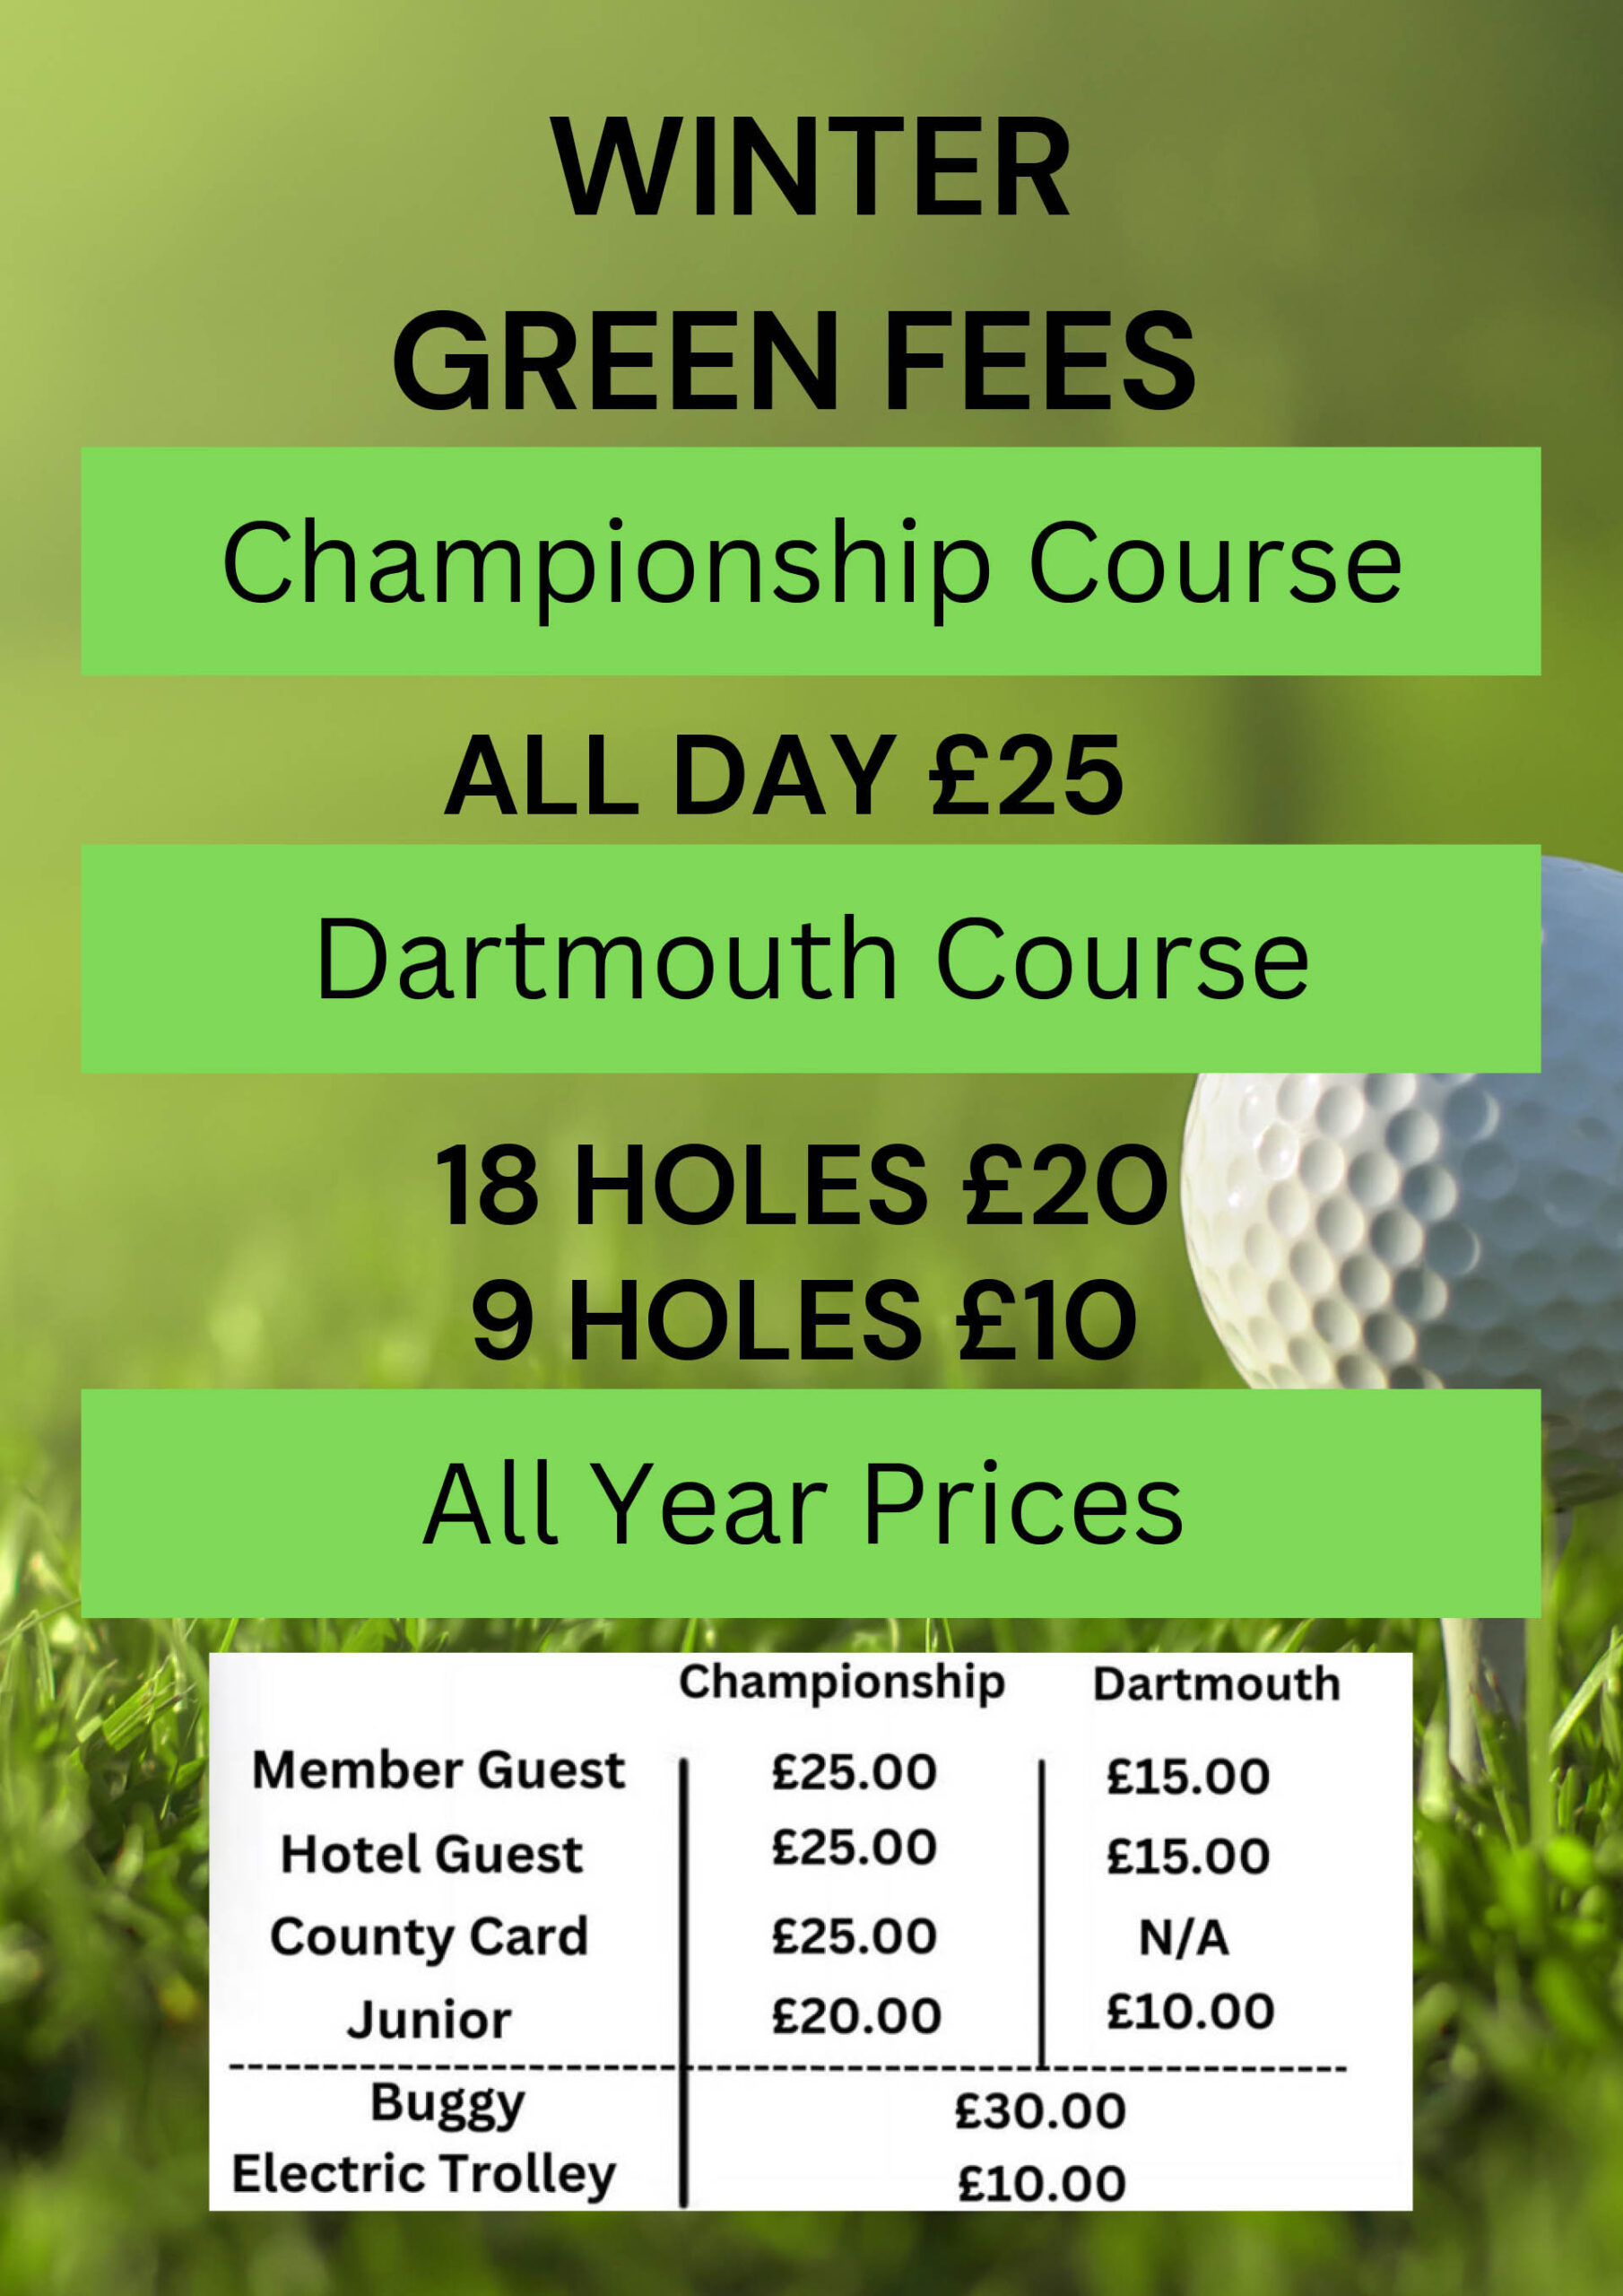 Winter Green Fees at the Dartmouth Hotel Golf Spa scaled